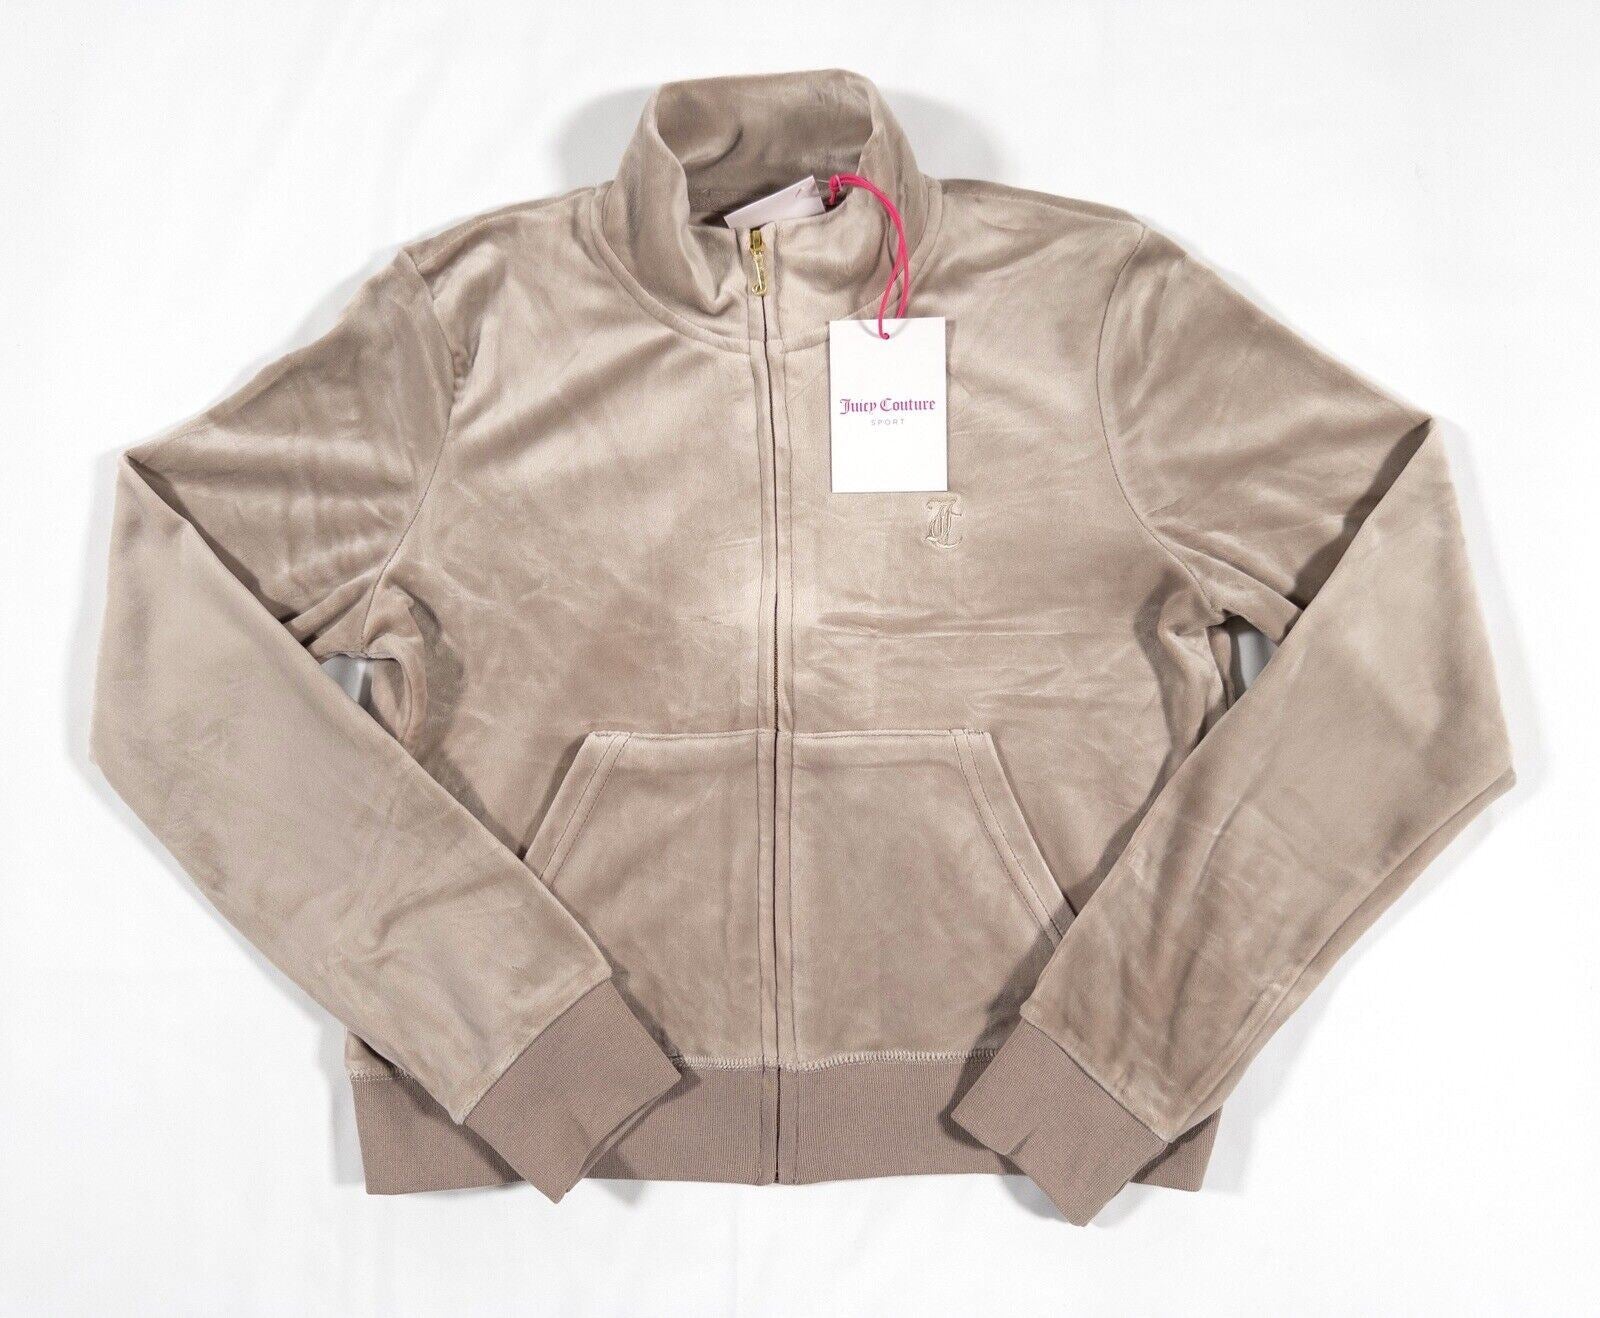 JUICY COUTURE SPORT Women's Velour Zip Up Track Top Taupe Size UK Medium